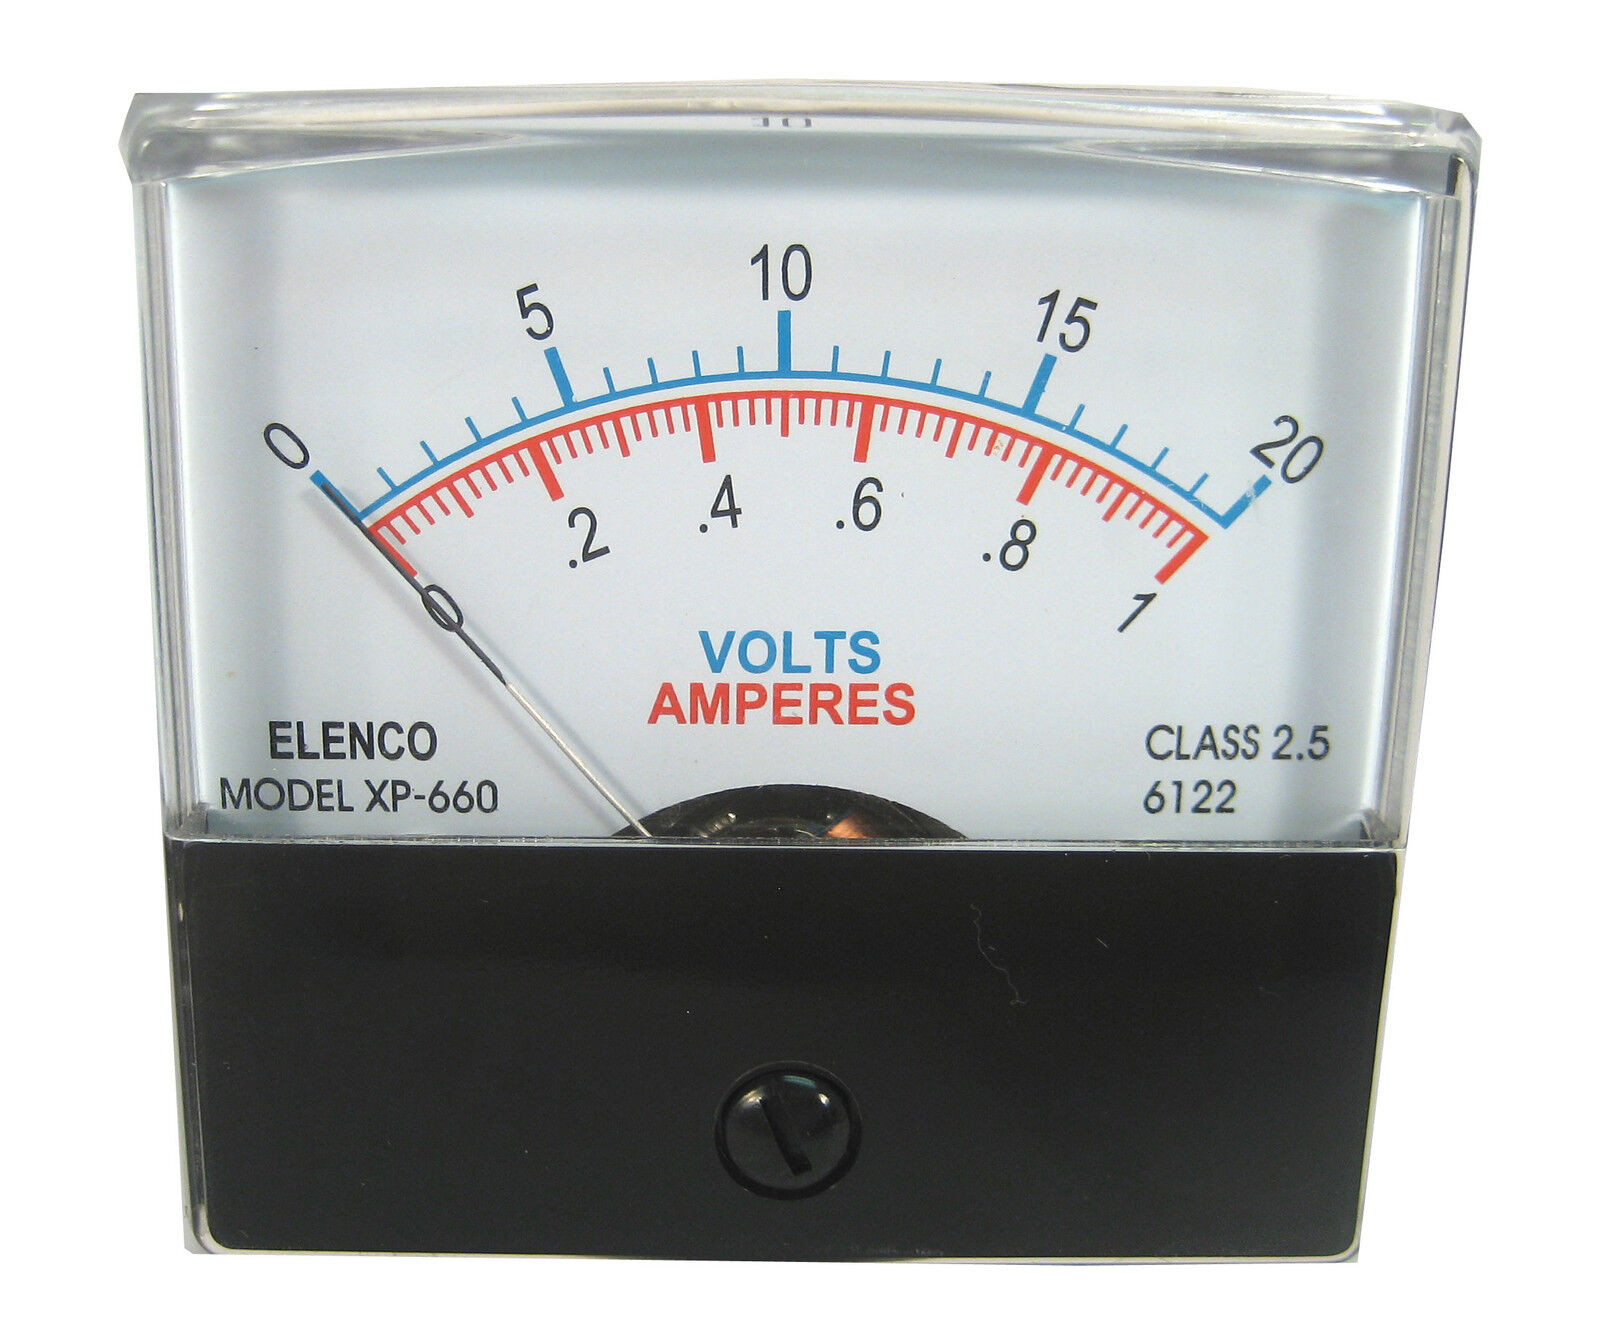 2-1/2” Inch Panel Meter: 0-20V & 0-1A Scales: 1mA Movement: Very Nice Meter